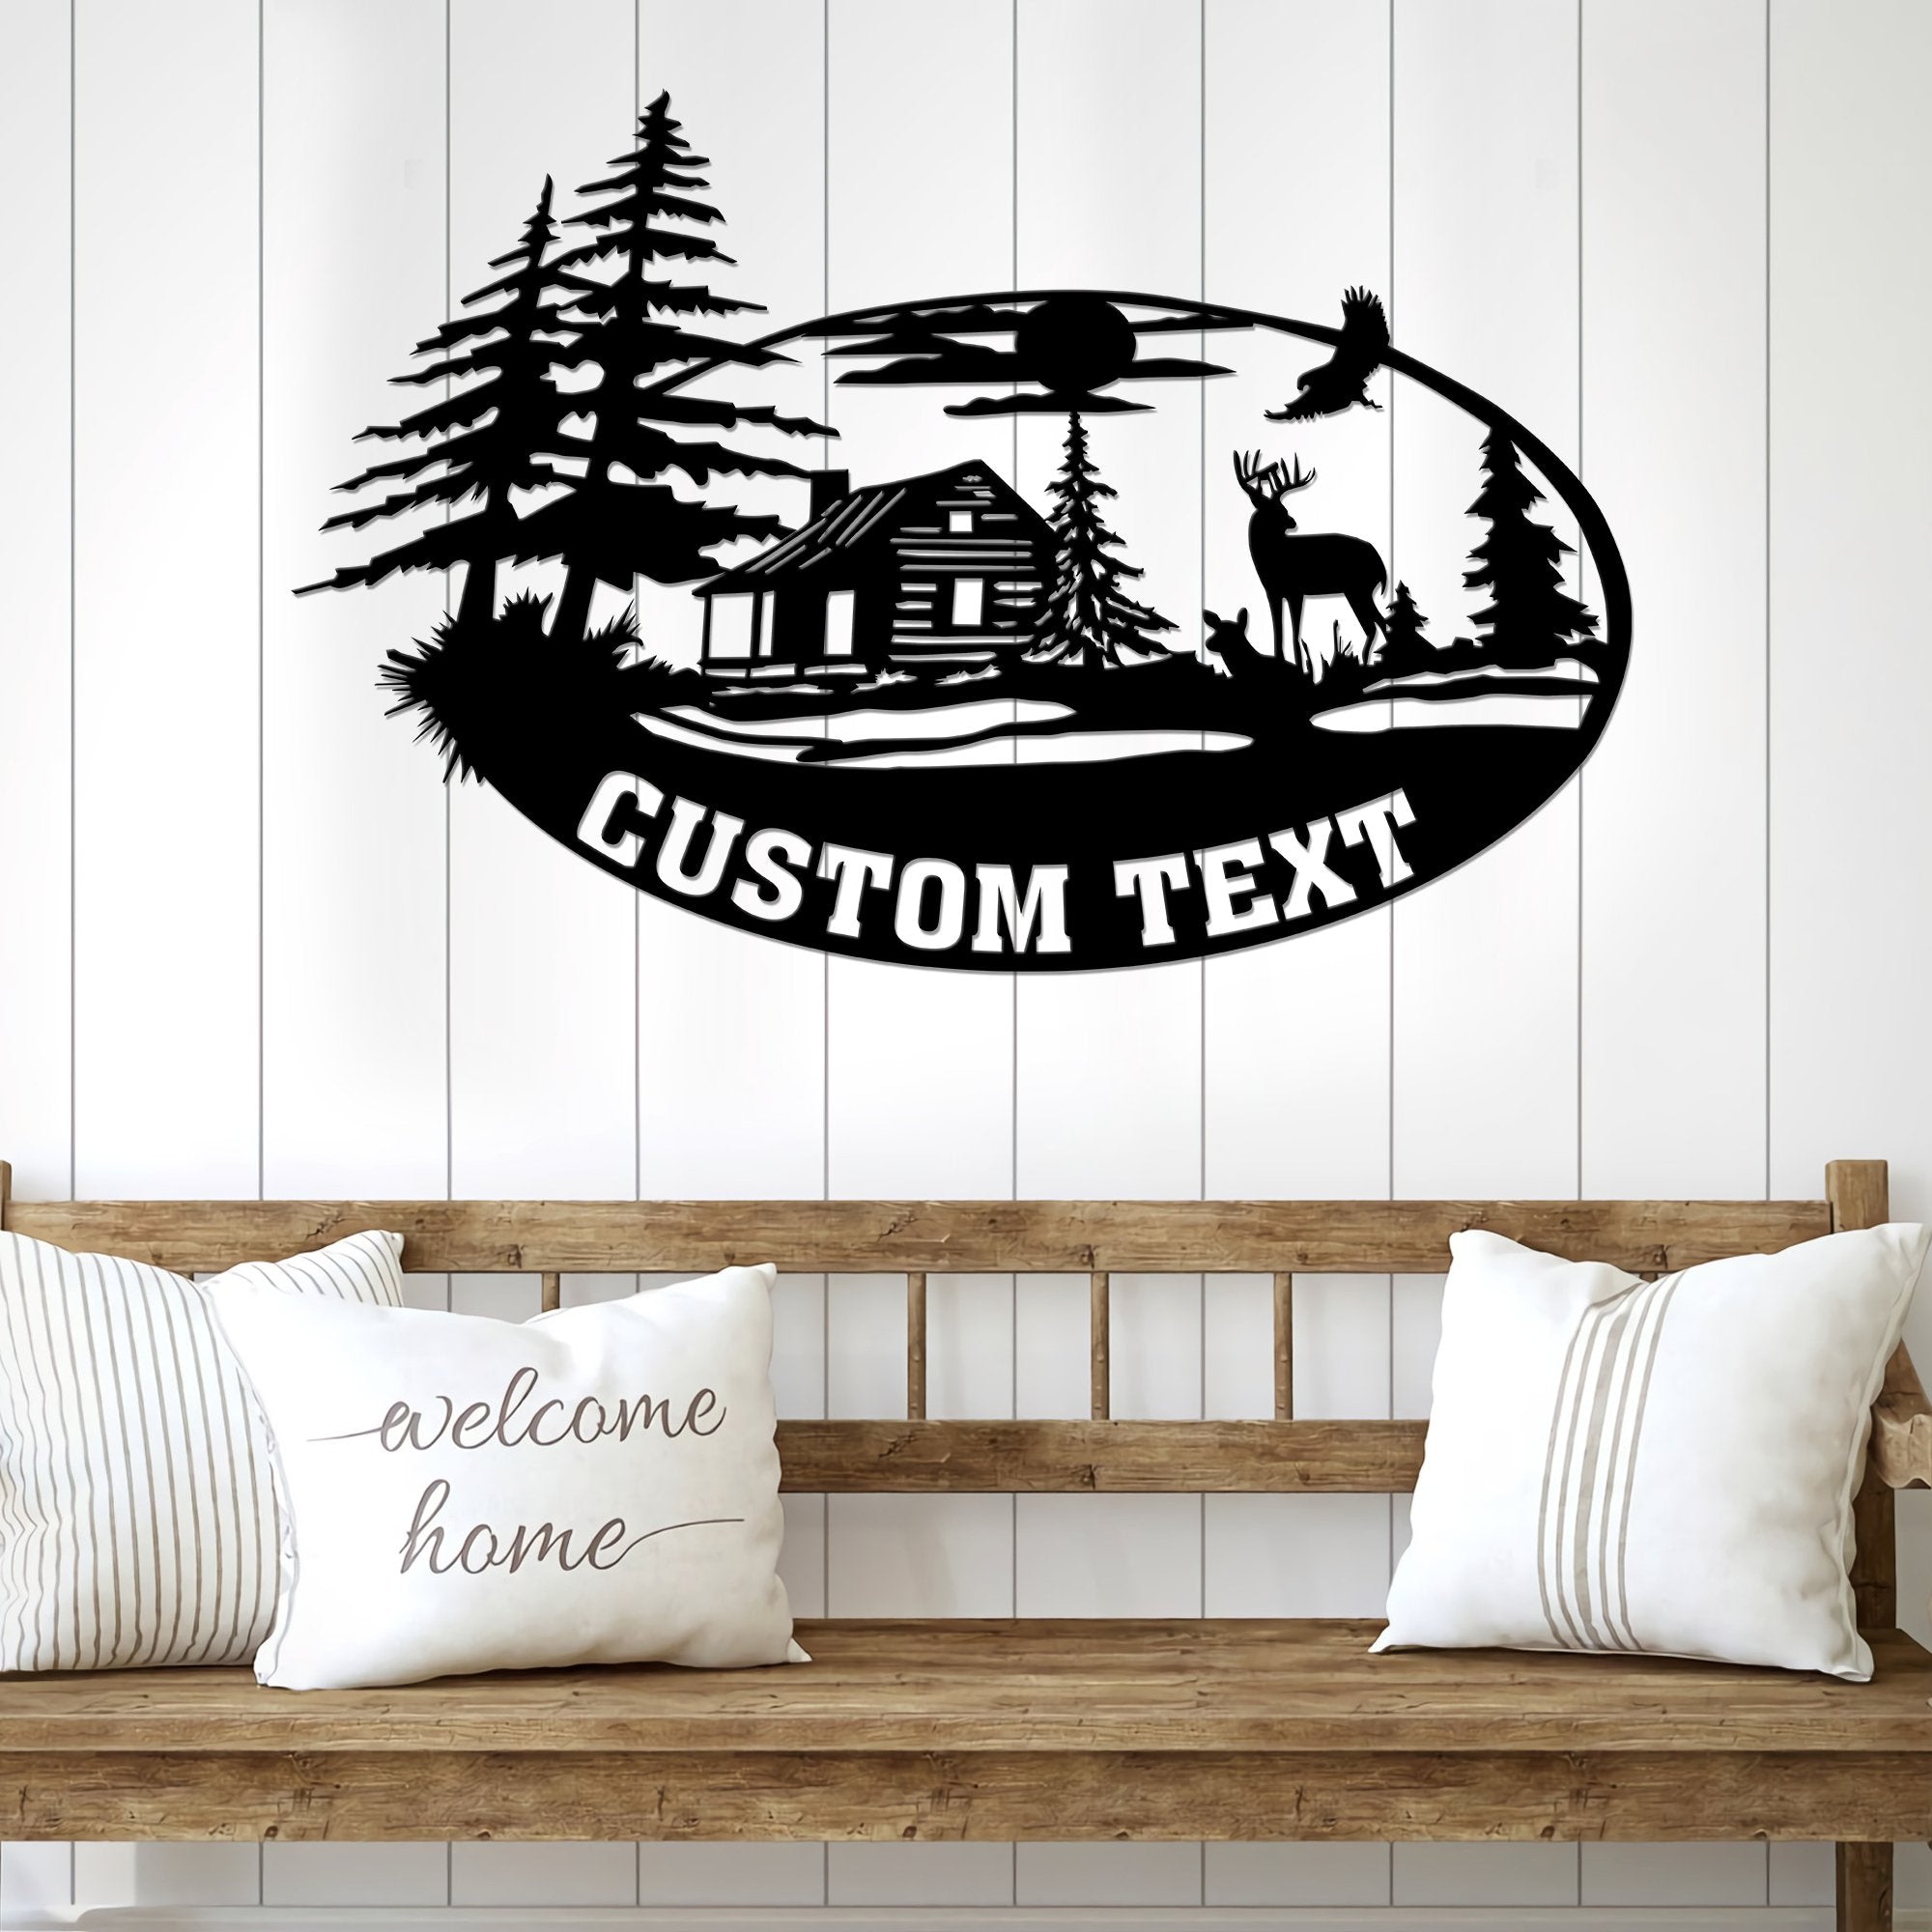 Life is Better At The Cabin Custom text Metal wall art